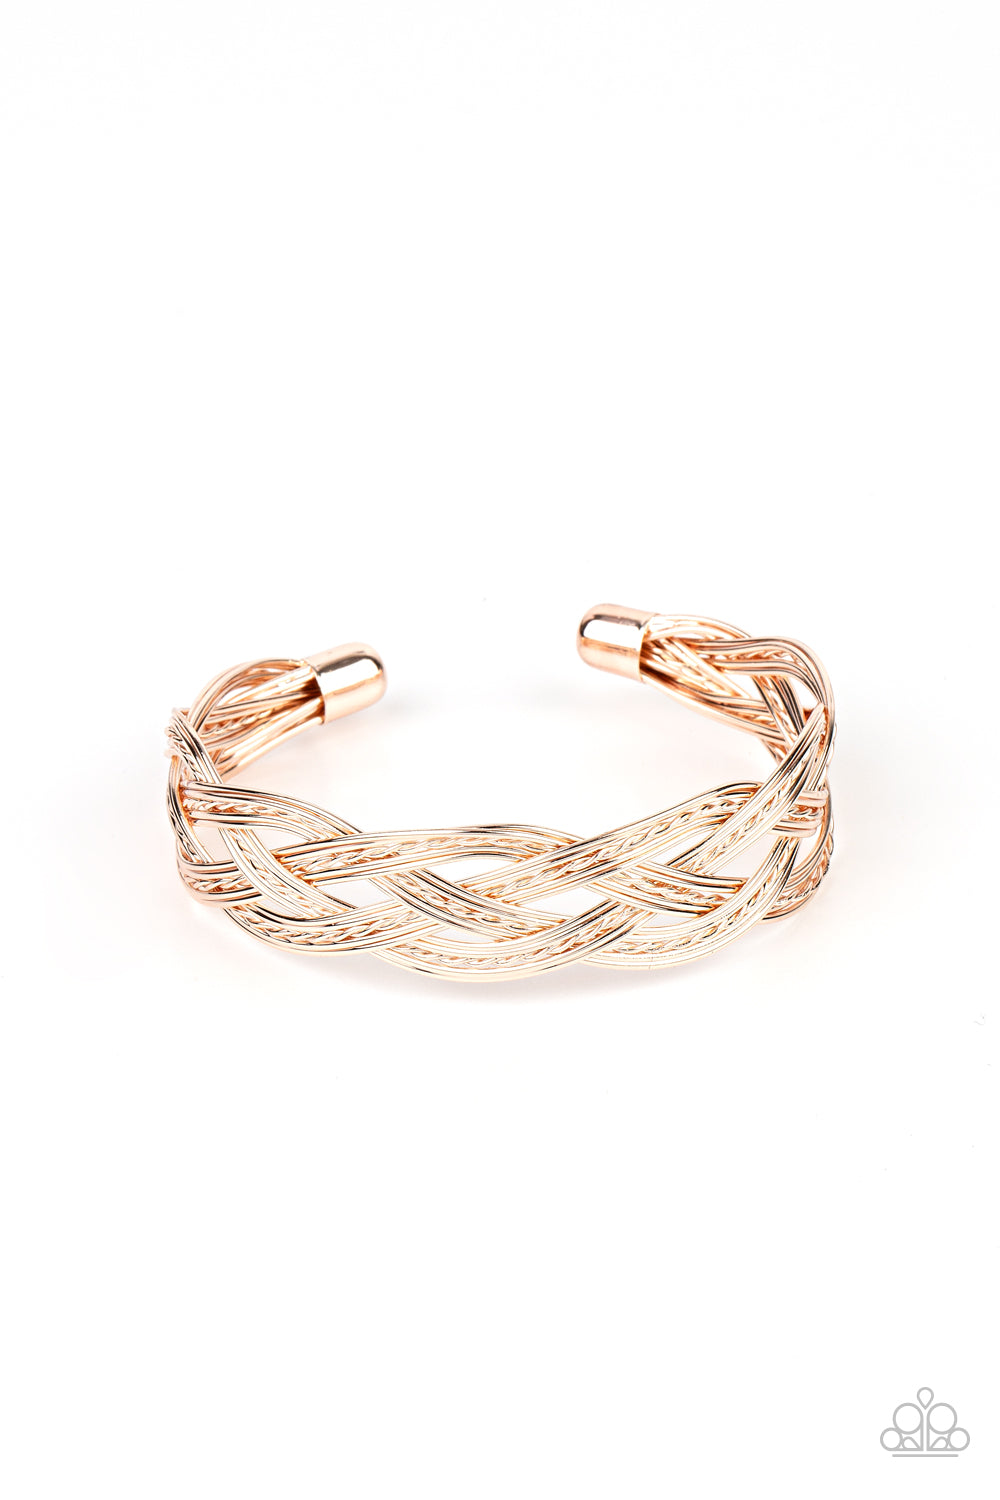 Get Your Wires Crossed - Rose Gold